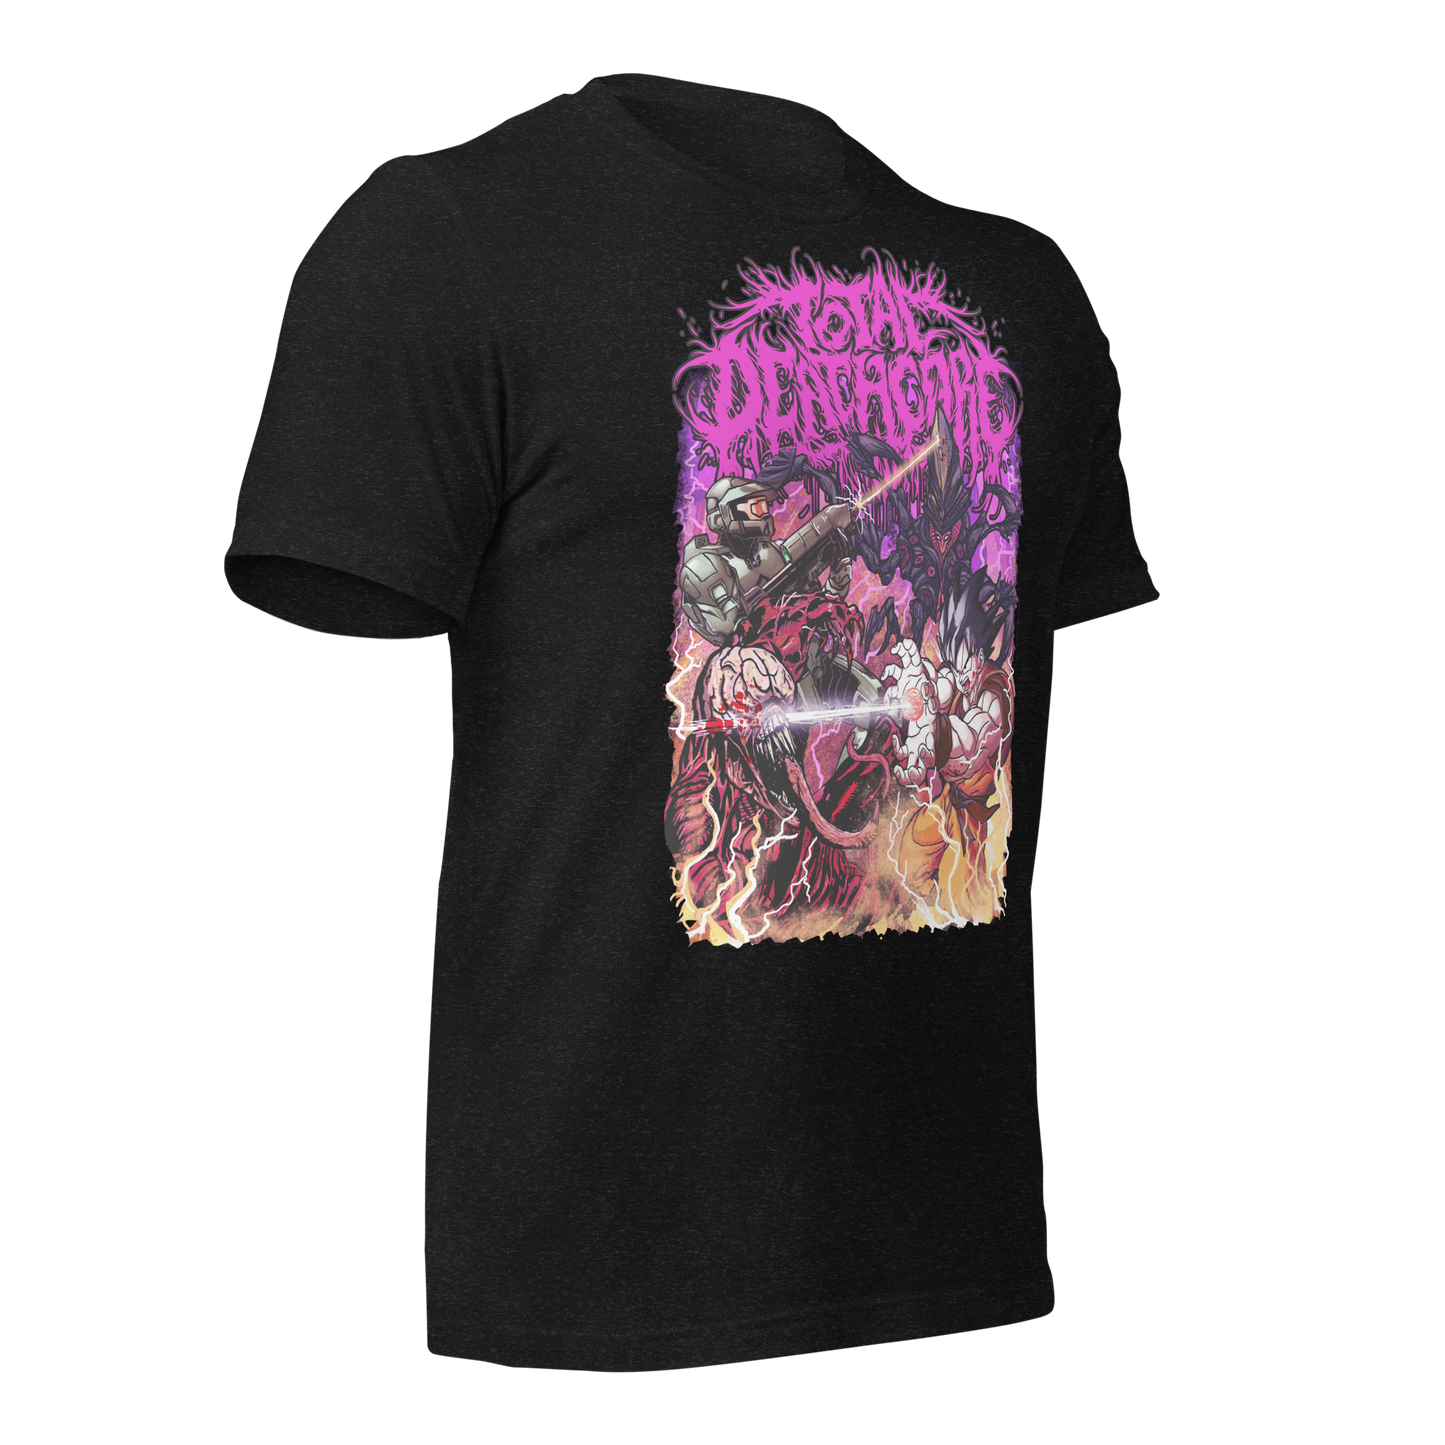 Total Deathcore "Fight For Your Life Heroes" - Unisex t-shirt